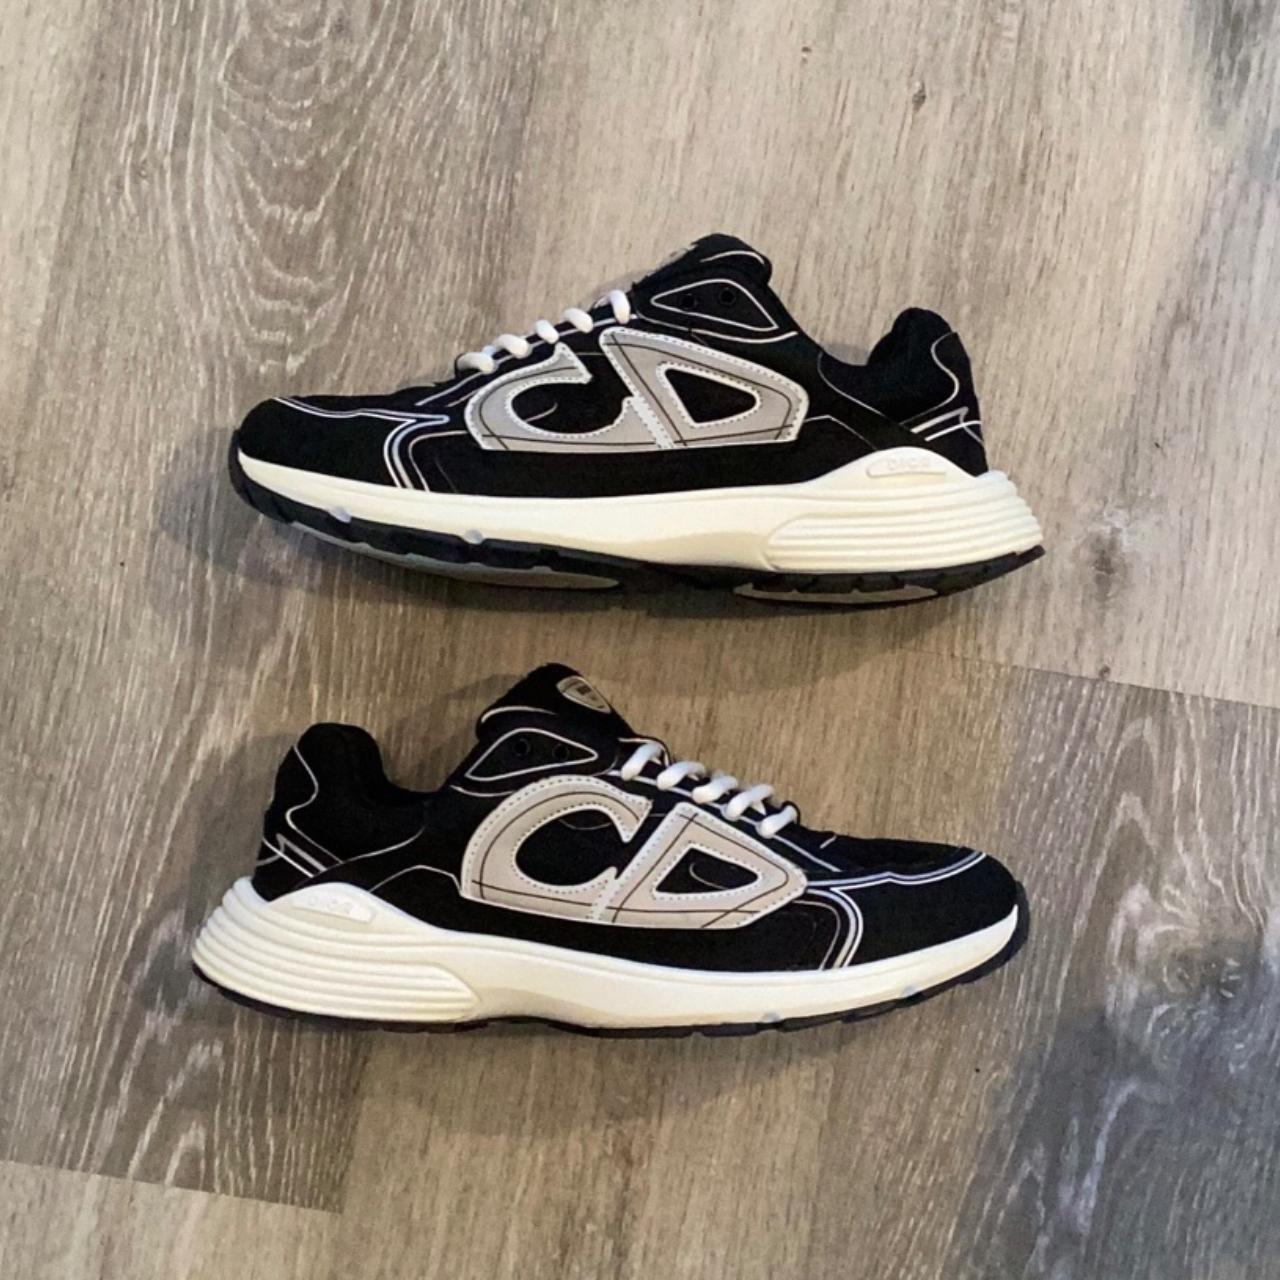 Christian Dior Men's Black and White Trainers | Depop